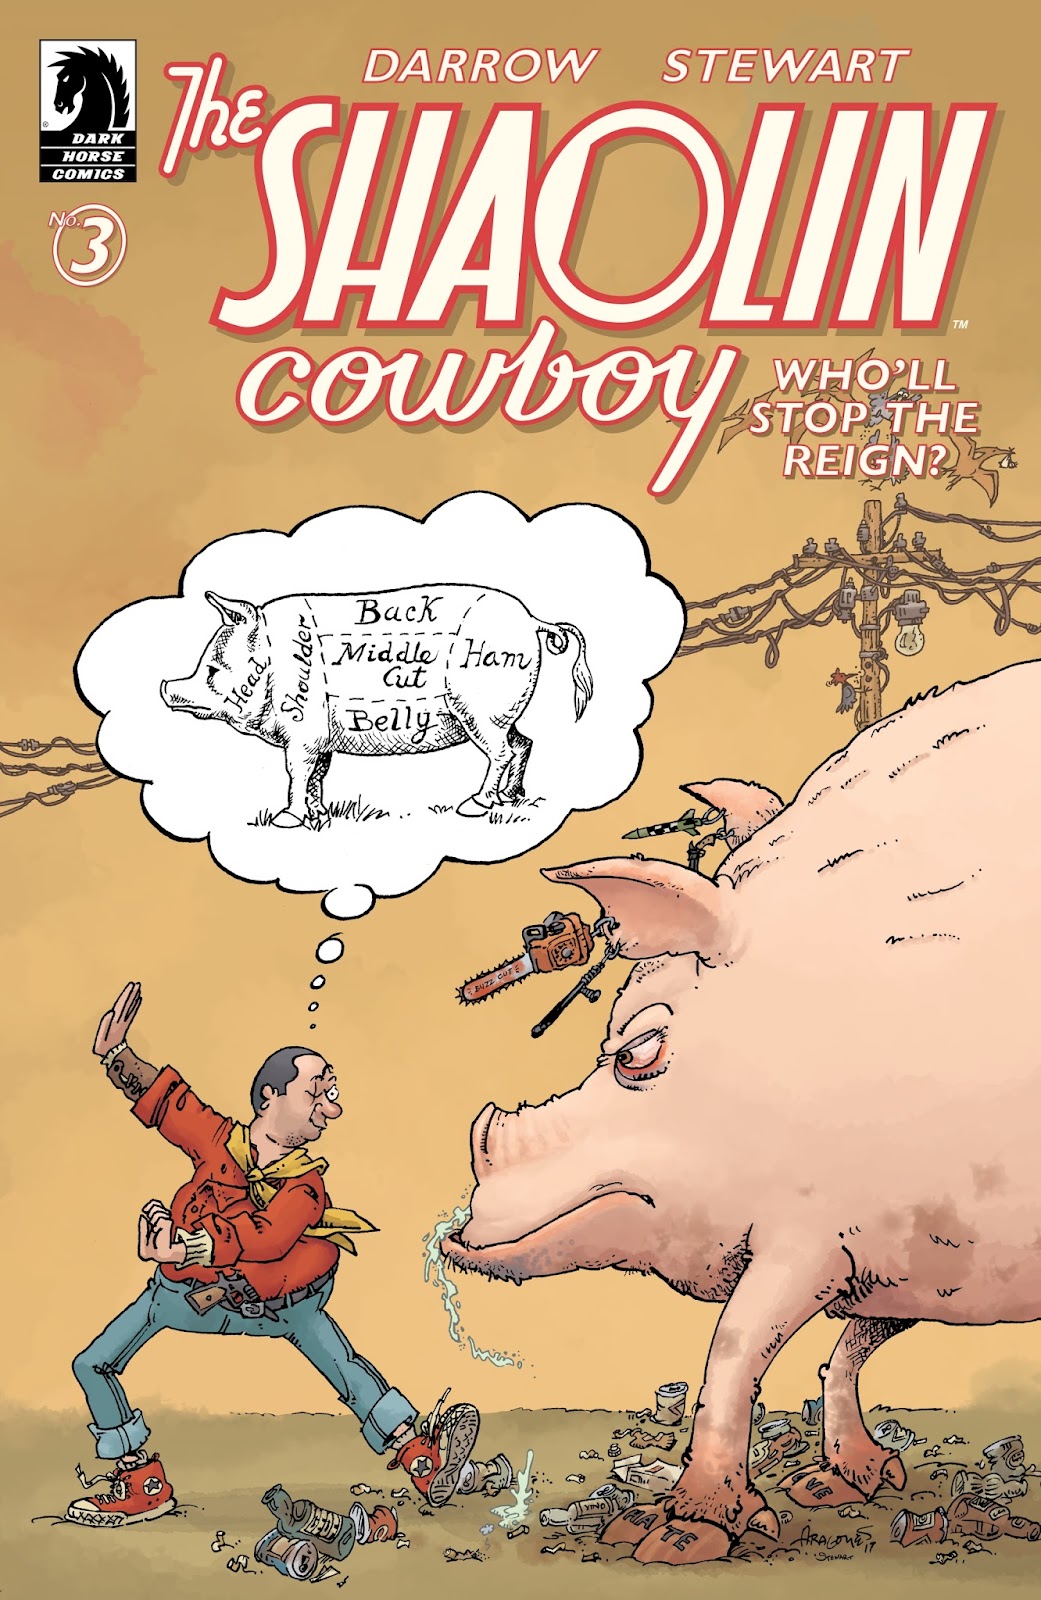 The Shaolin Cowboy: Who'll Stop the Reign? issue 3 - Page 2